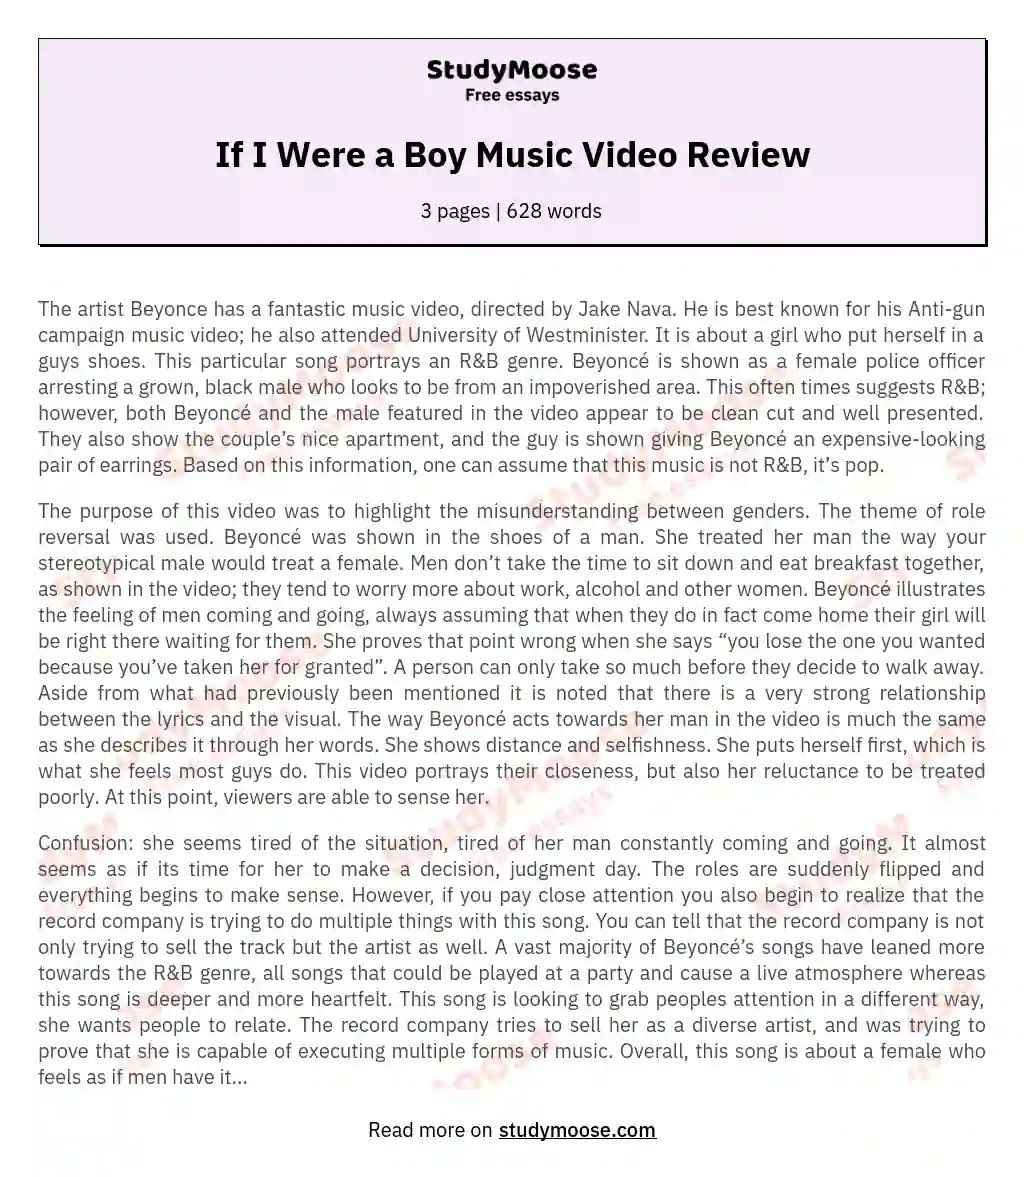 If I Were a Boy Music Video Review